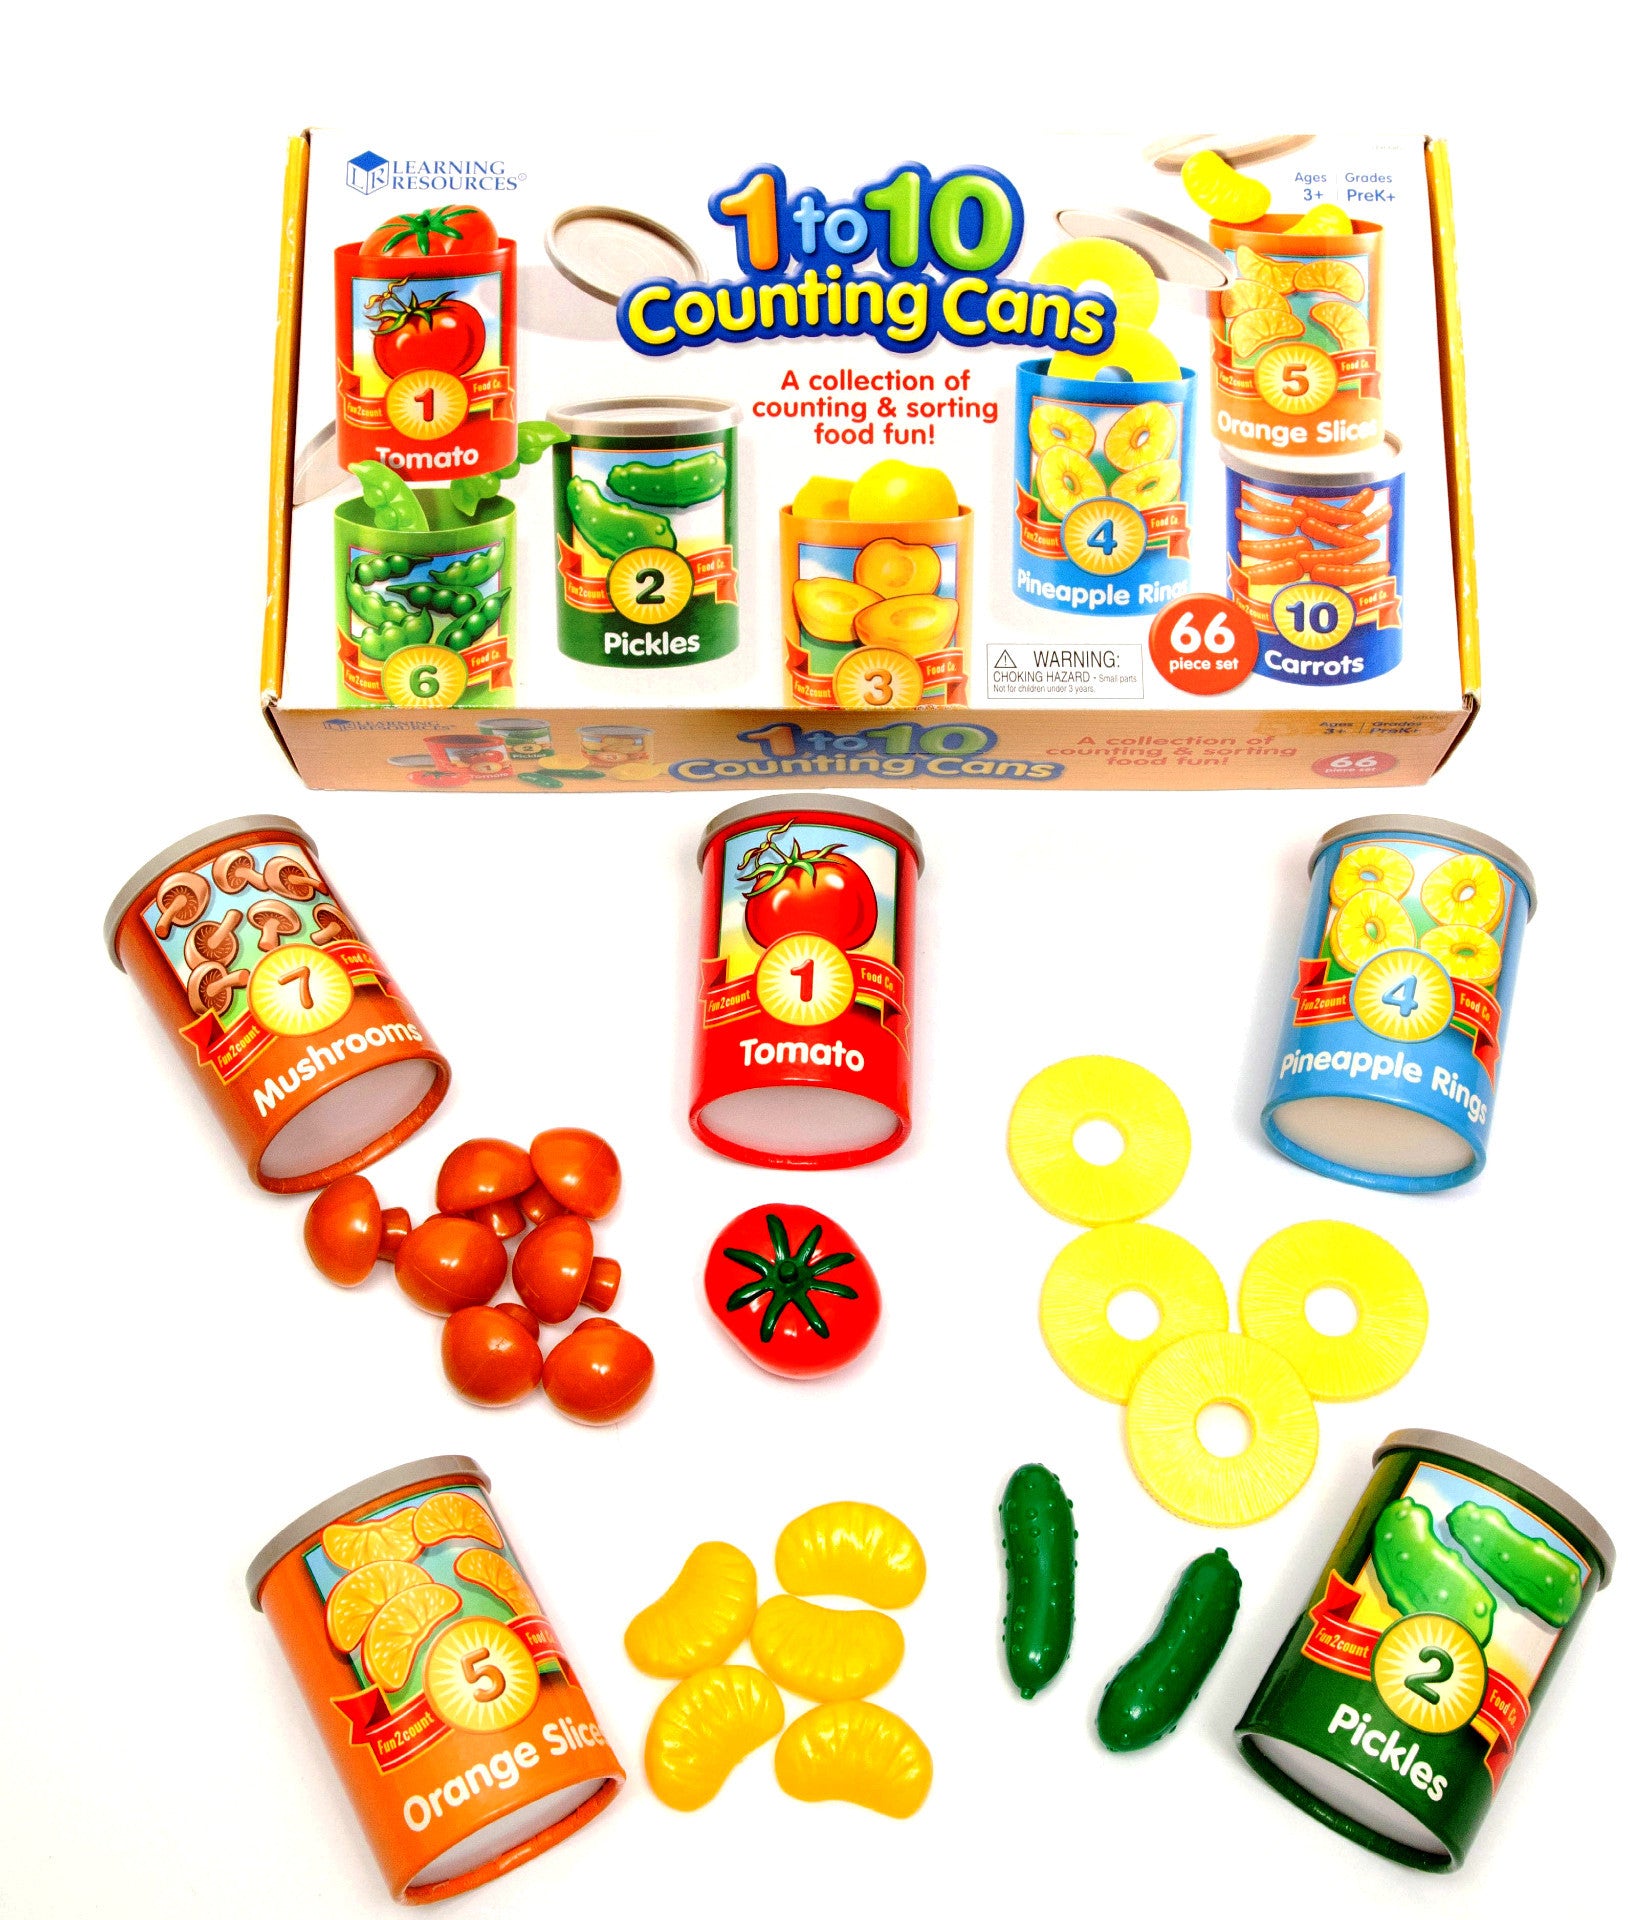 1 to 10 Counting Cans | Counting and Sorting Toy – Different Roads